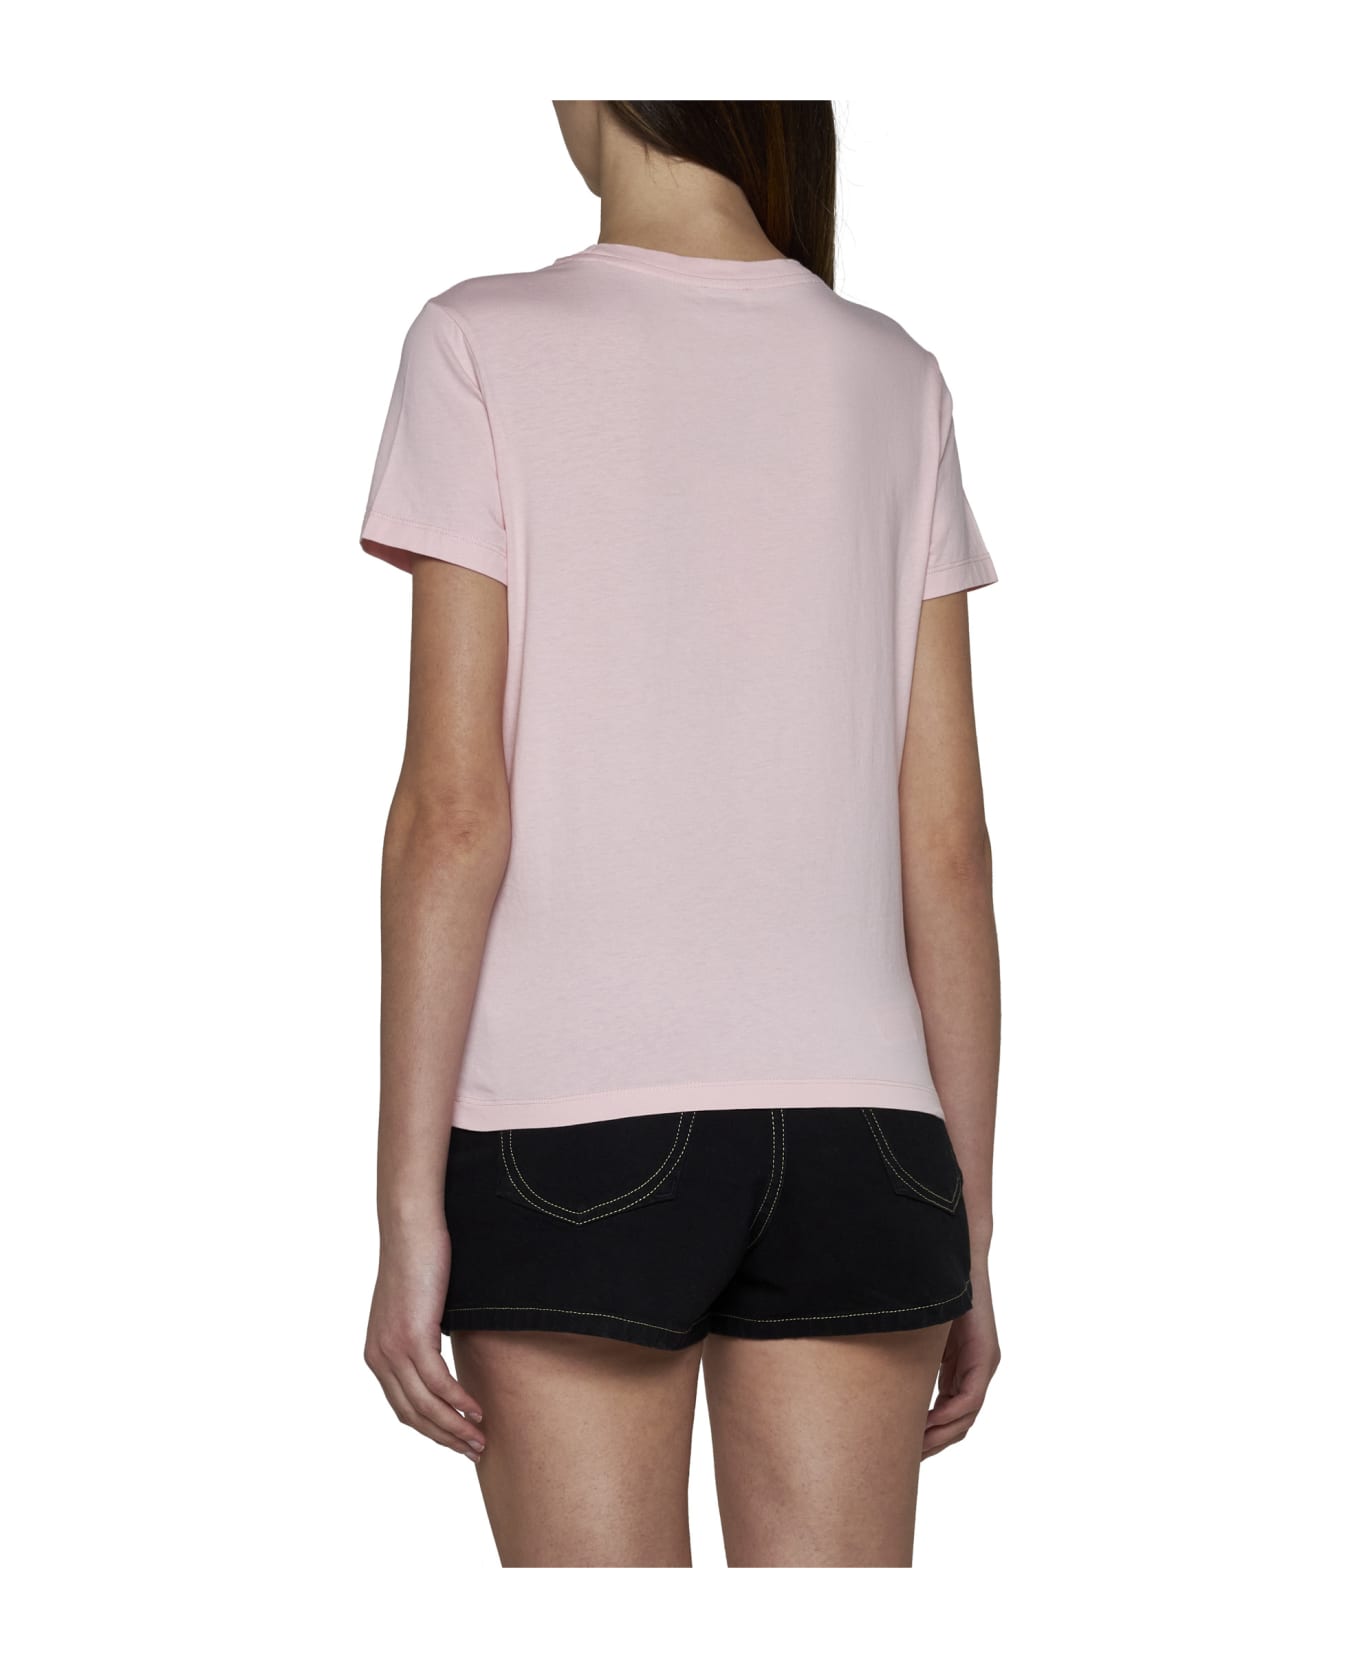 Kenzo T-Shirt - Faded pink